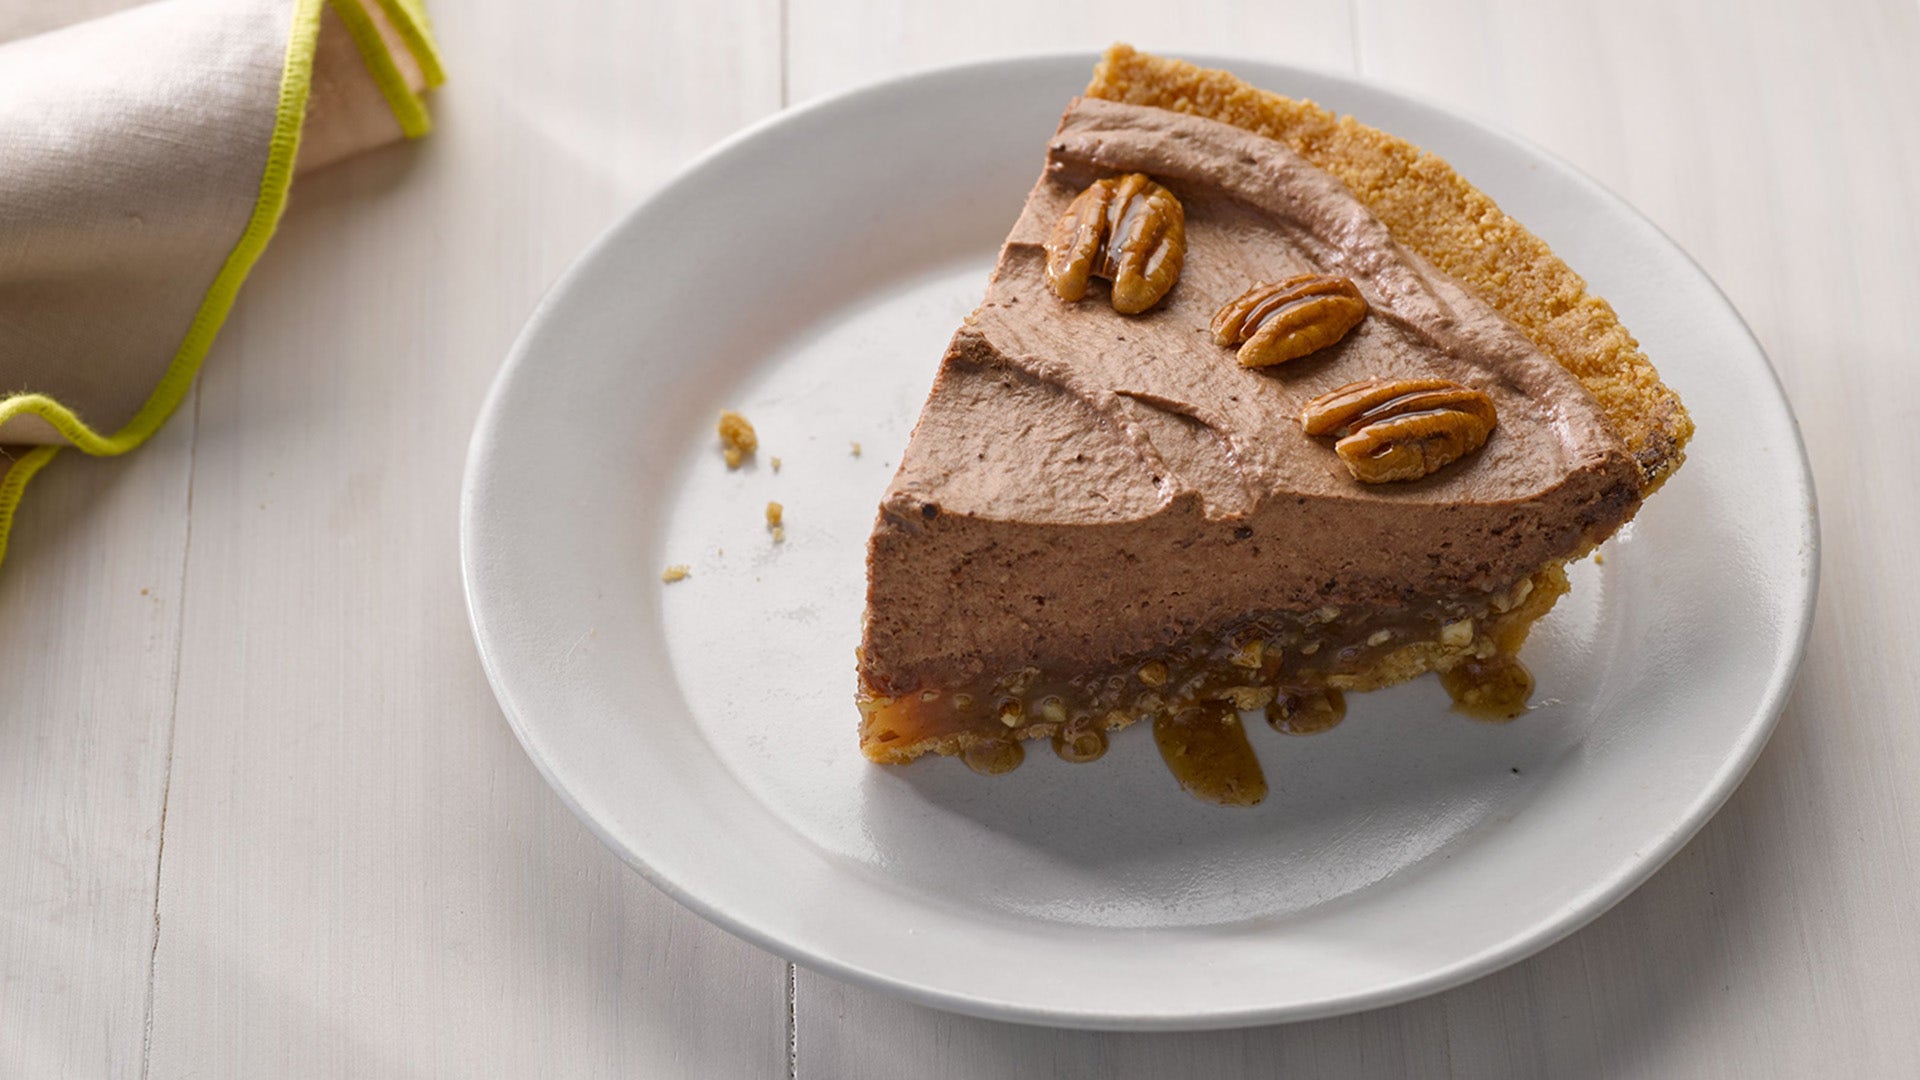 Image of Chocolate Mousse and Praline Pie